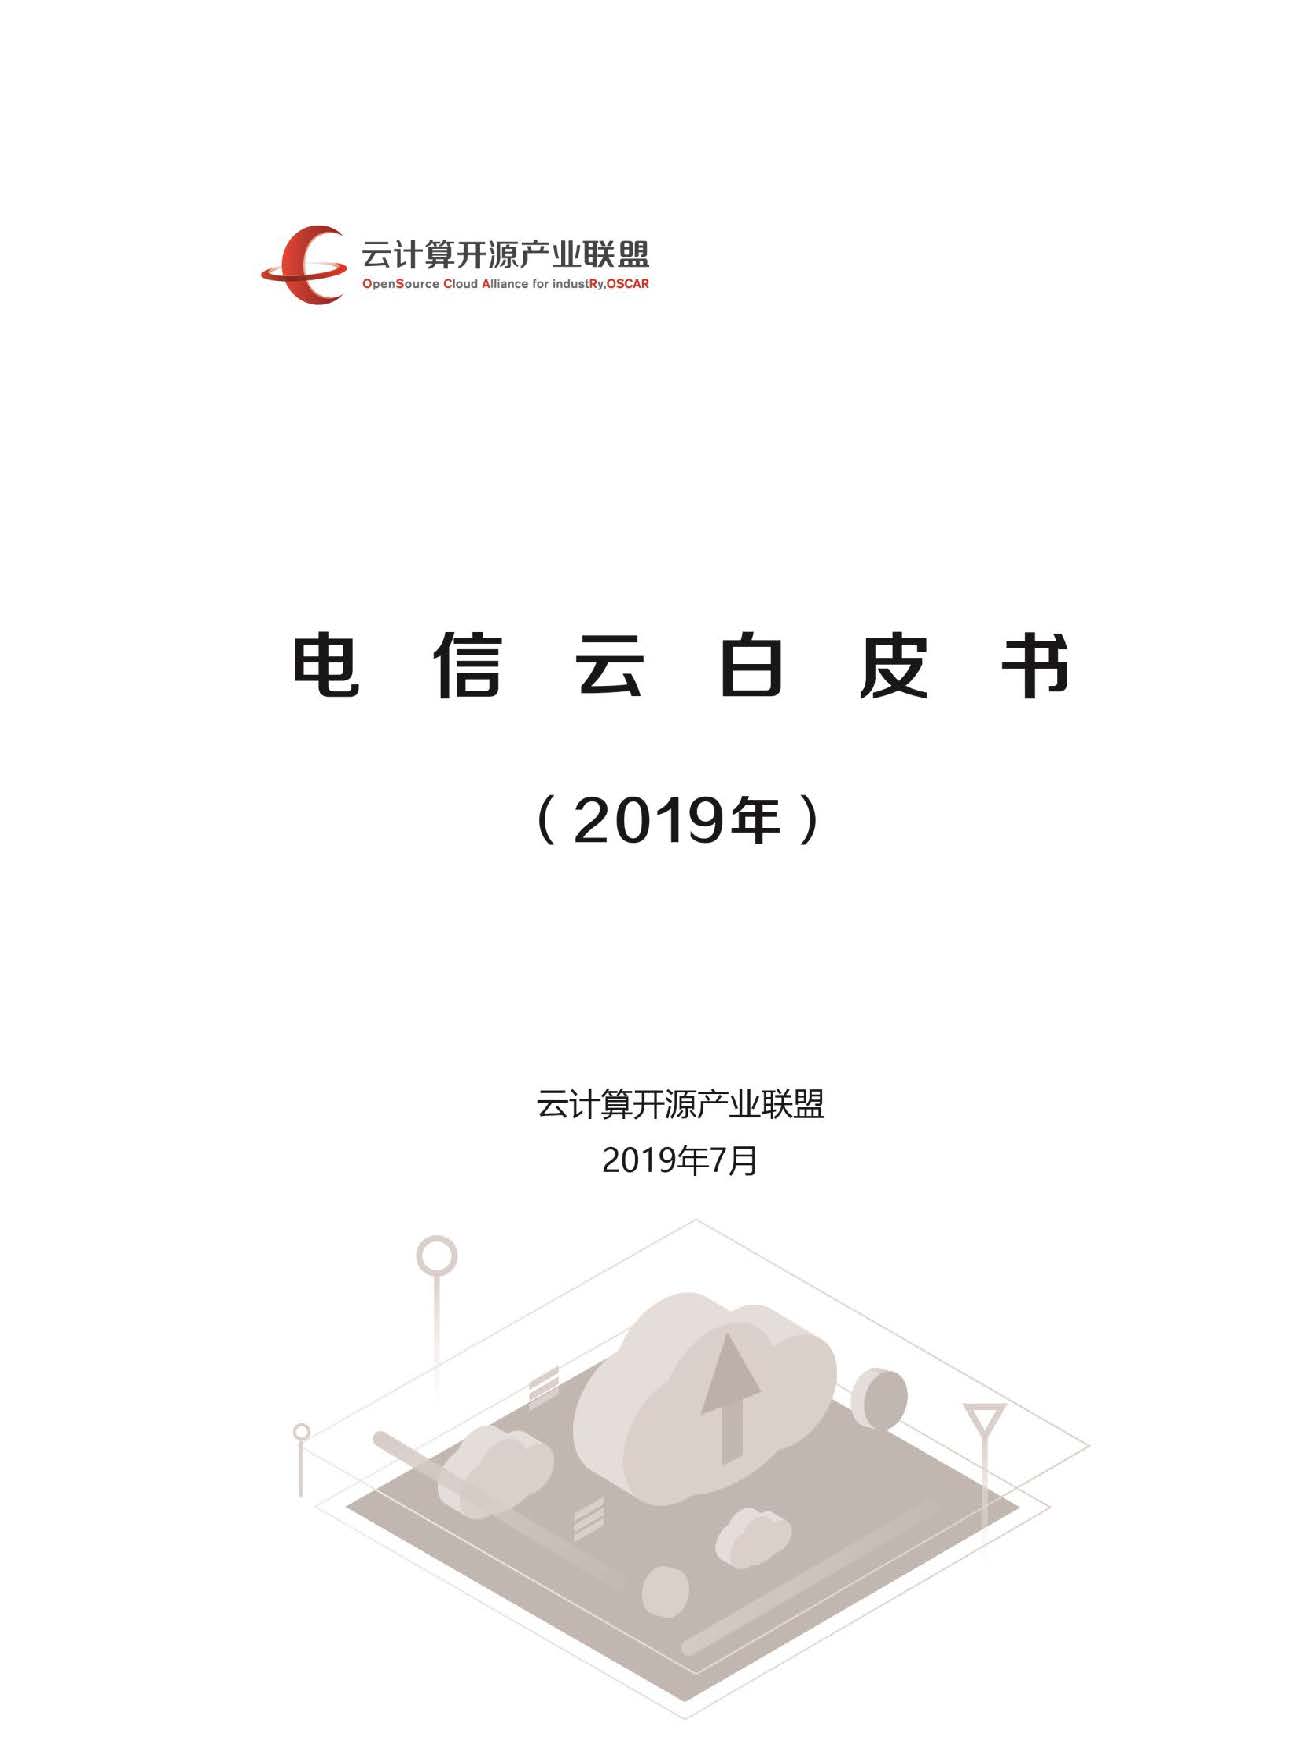 Pages from 电信云白皮书2019.jpg